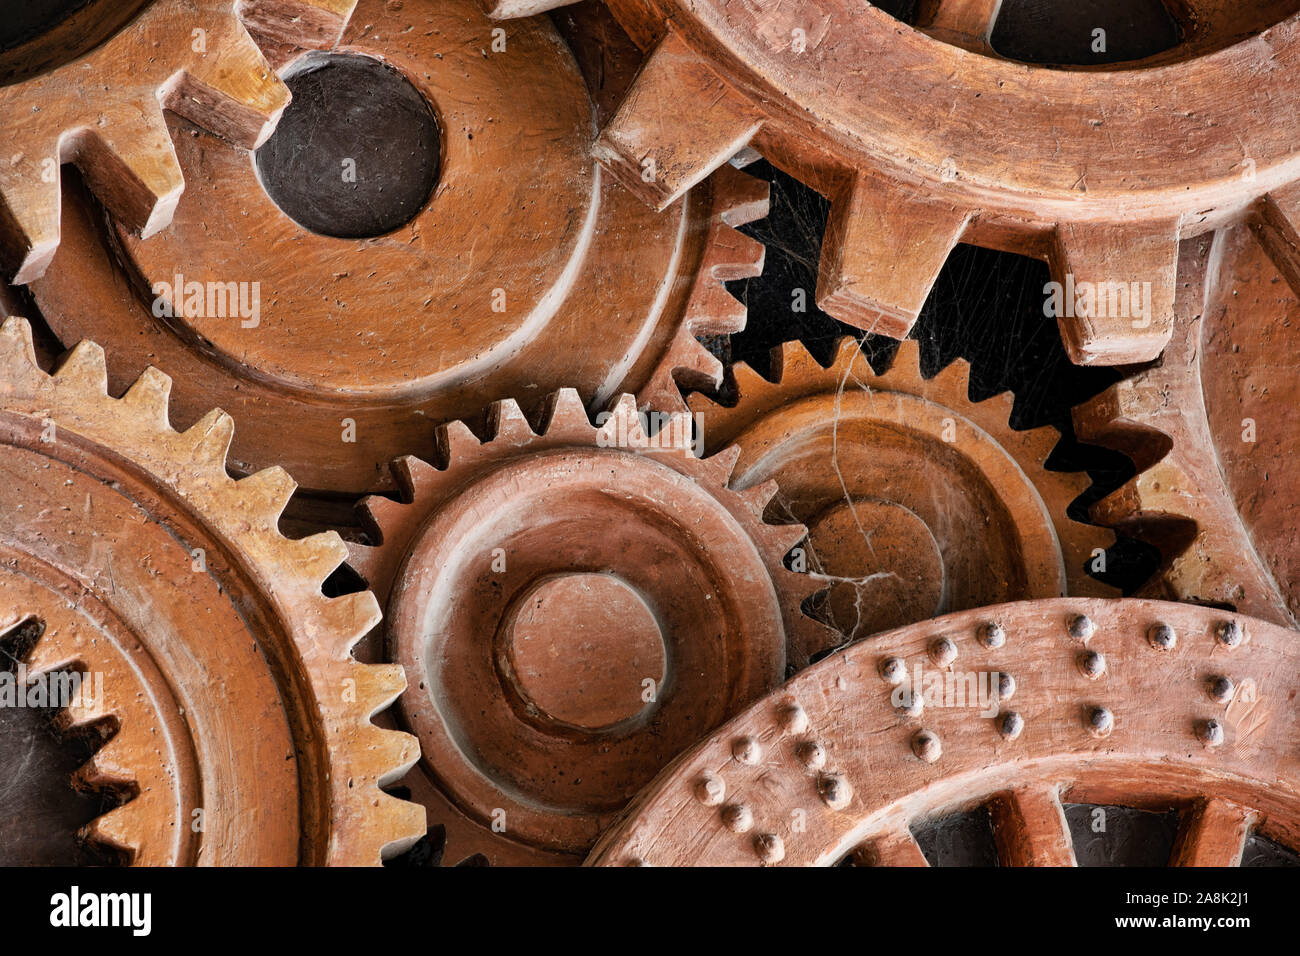 Grunge gears and wheels create an industrial steampunk background. Machine parts, and mechanical machinery make for a nice grunge look. Stock Photo